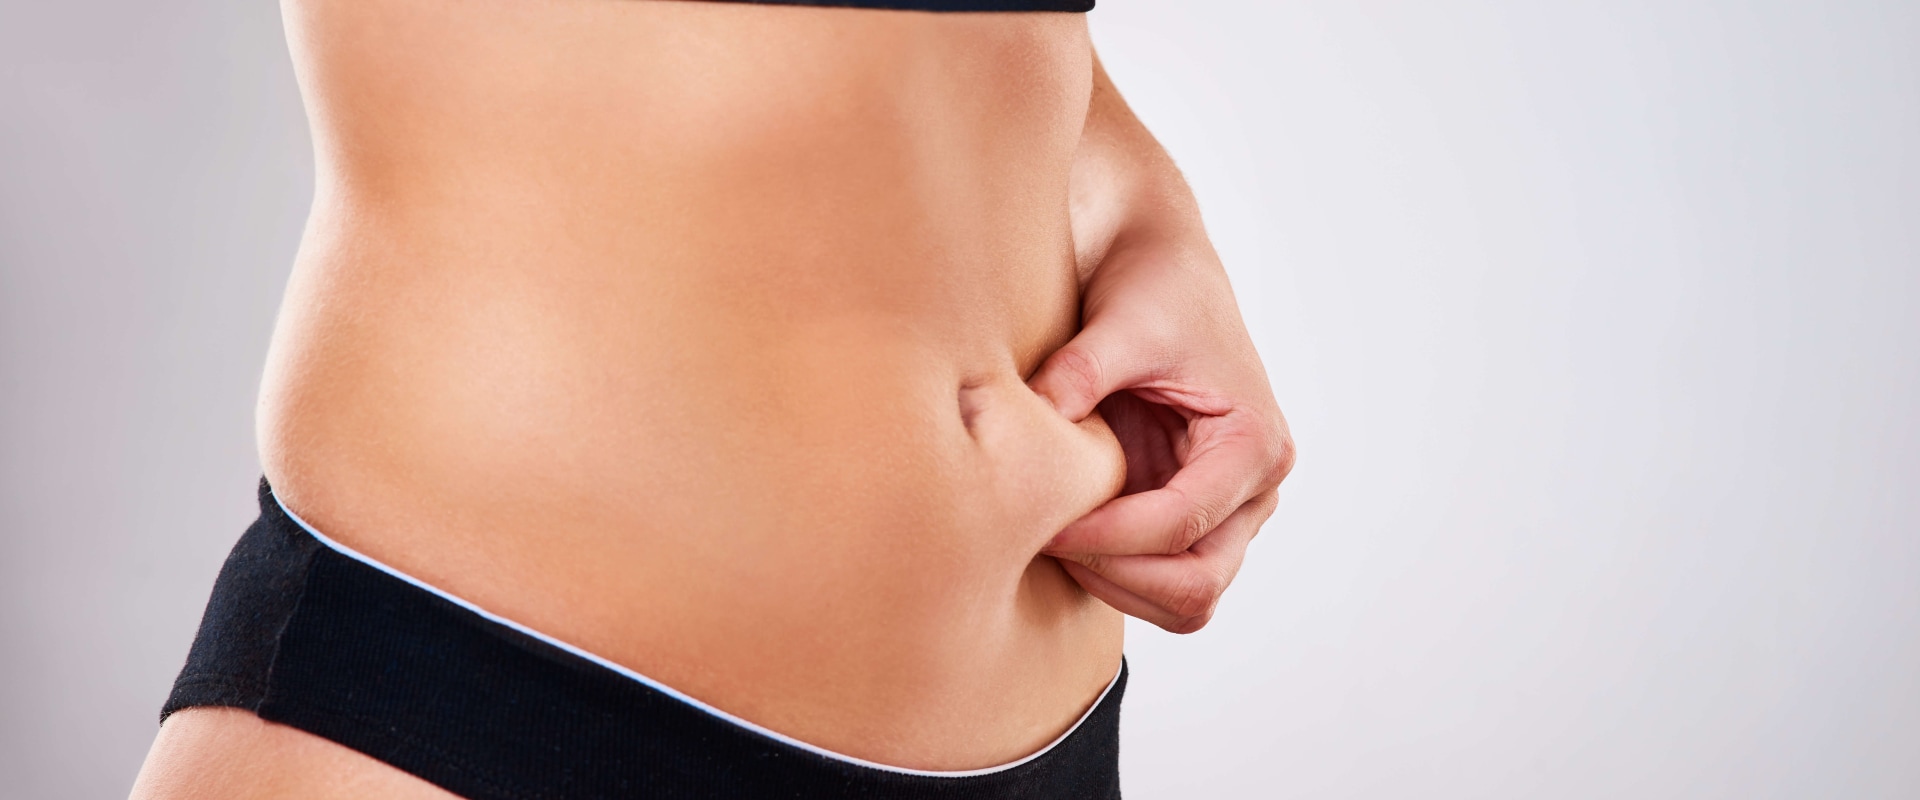 Maintaining Results from Fat Reduction Treatments: A Guide